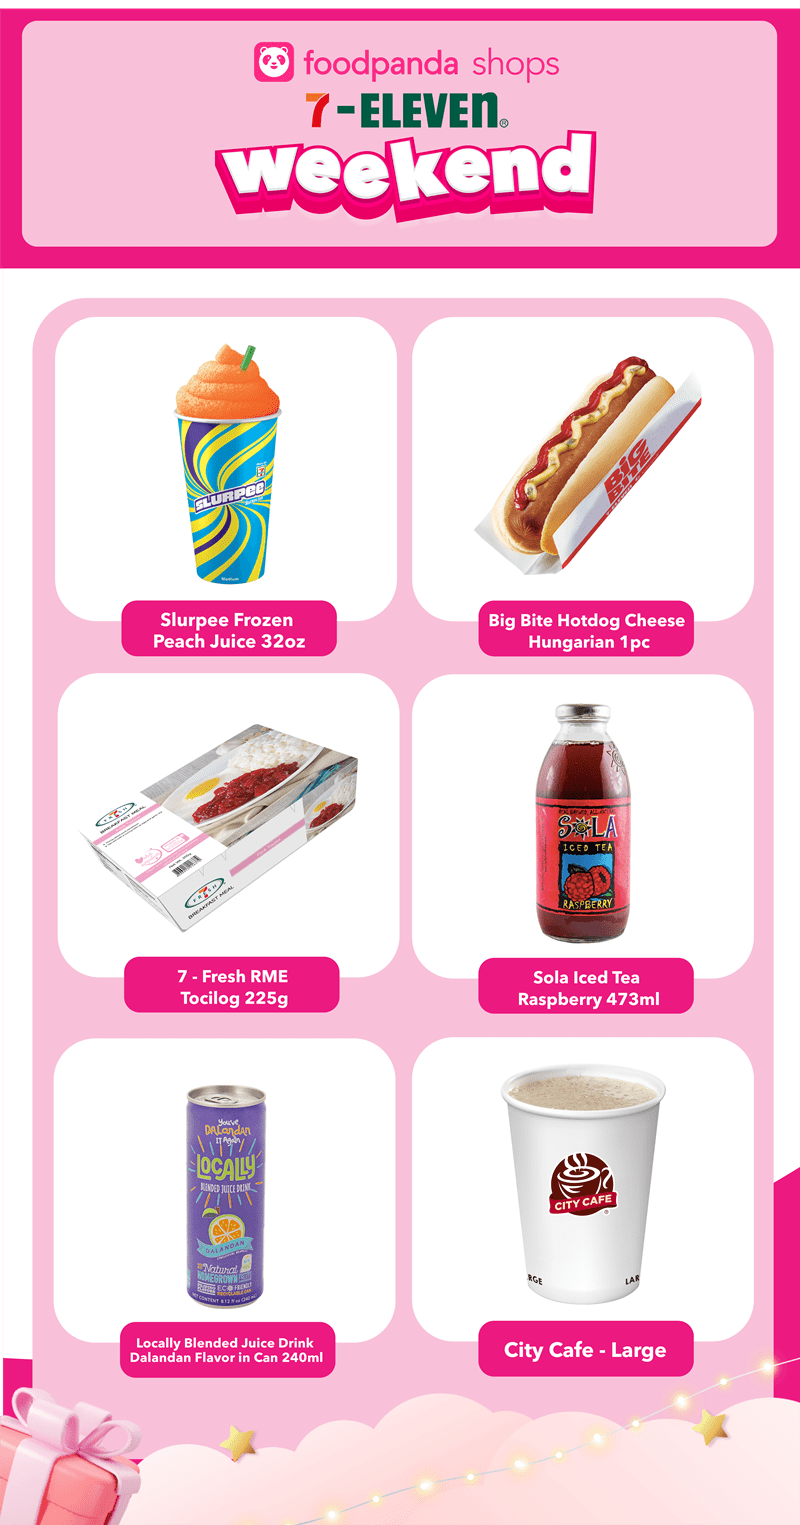 satisfy-your-cravings-every-weekend-this-november-with-7-eleven-via-foodpanda-shops